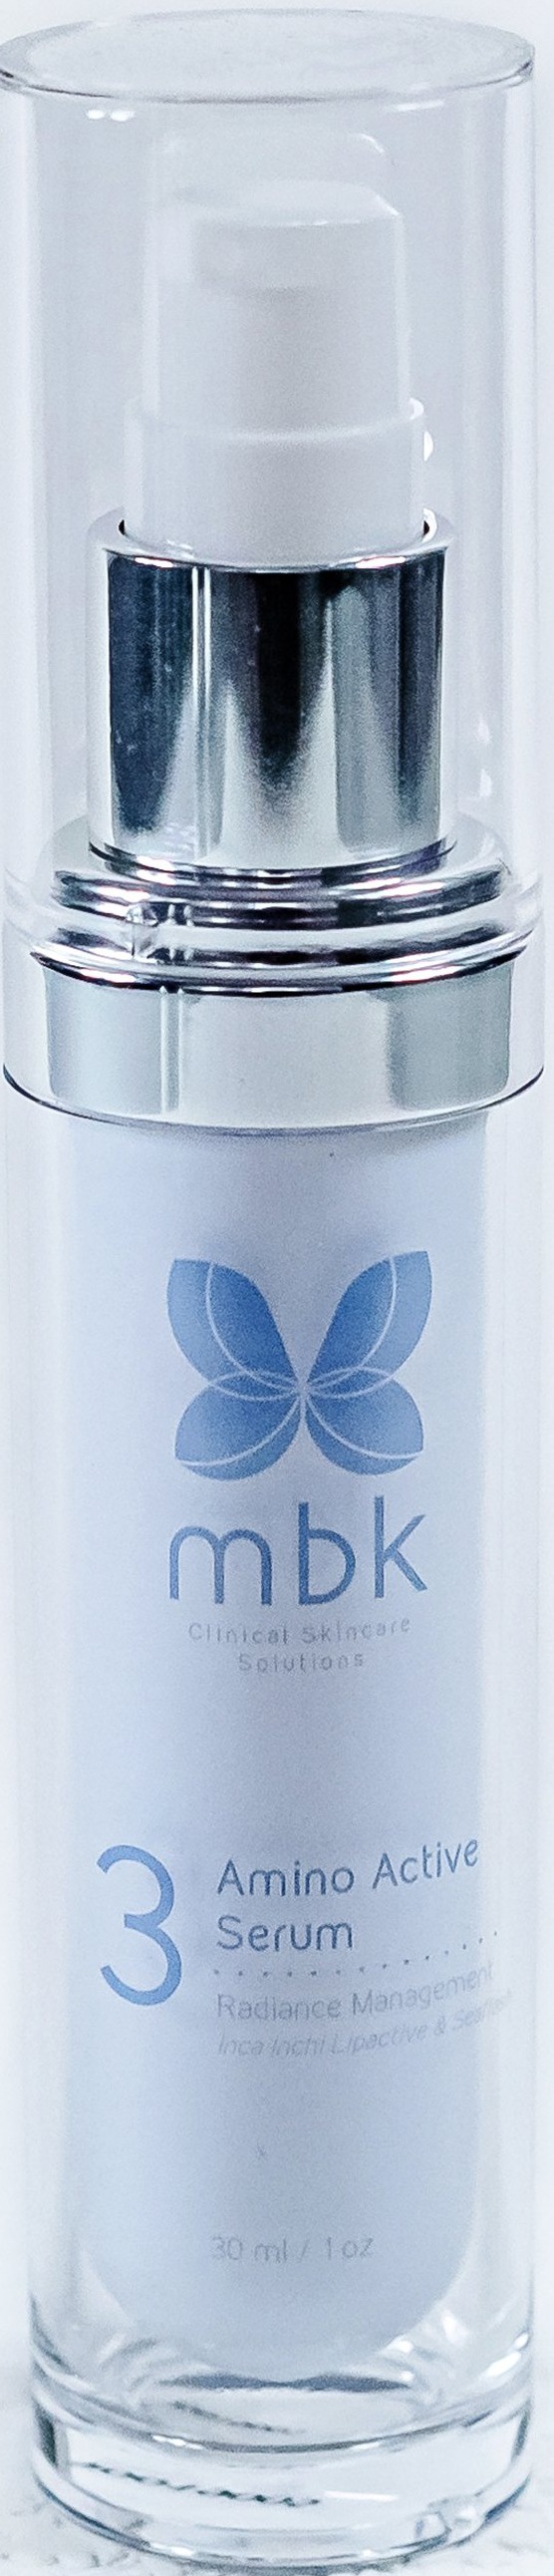 MBK Clinical Skincare Solutions Amino Active Serum